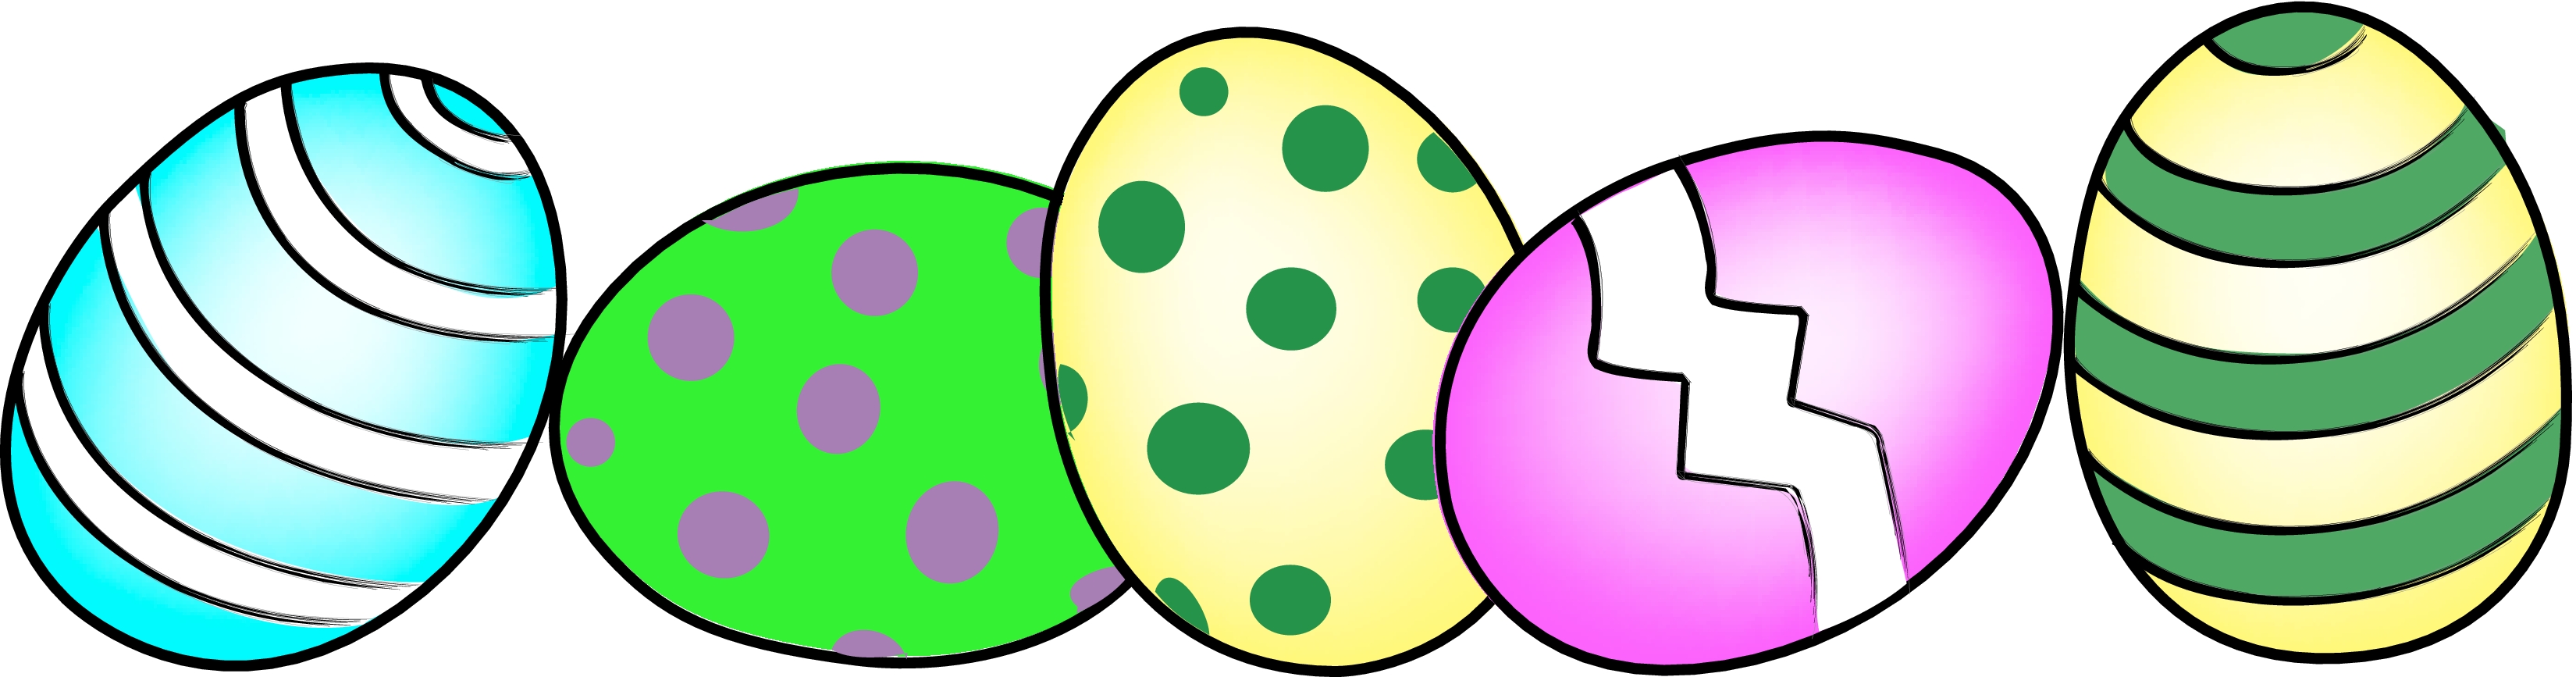 easter clipart free vector - photo #40